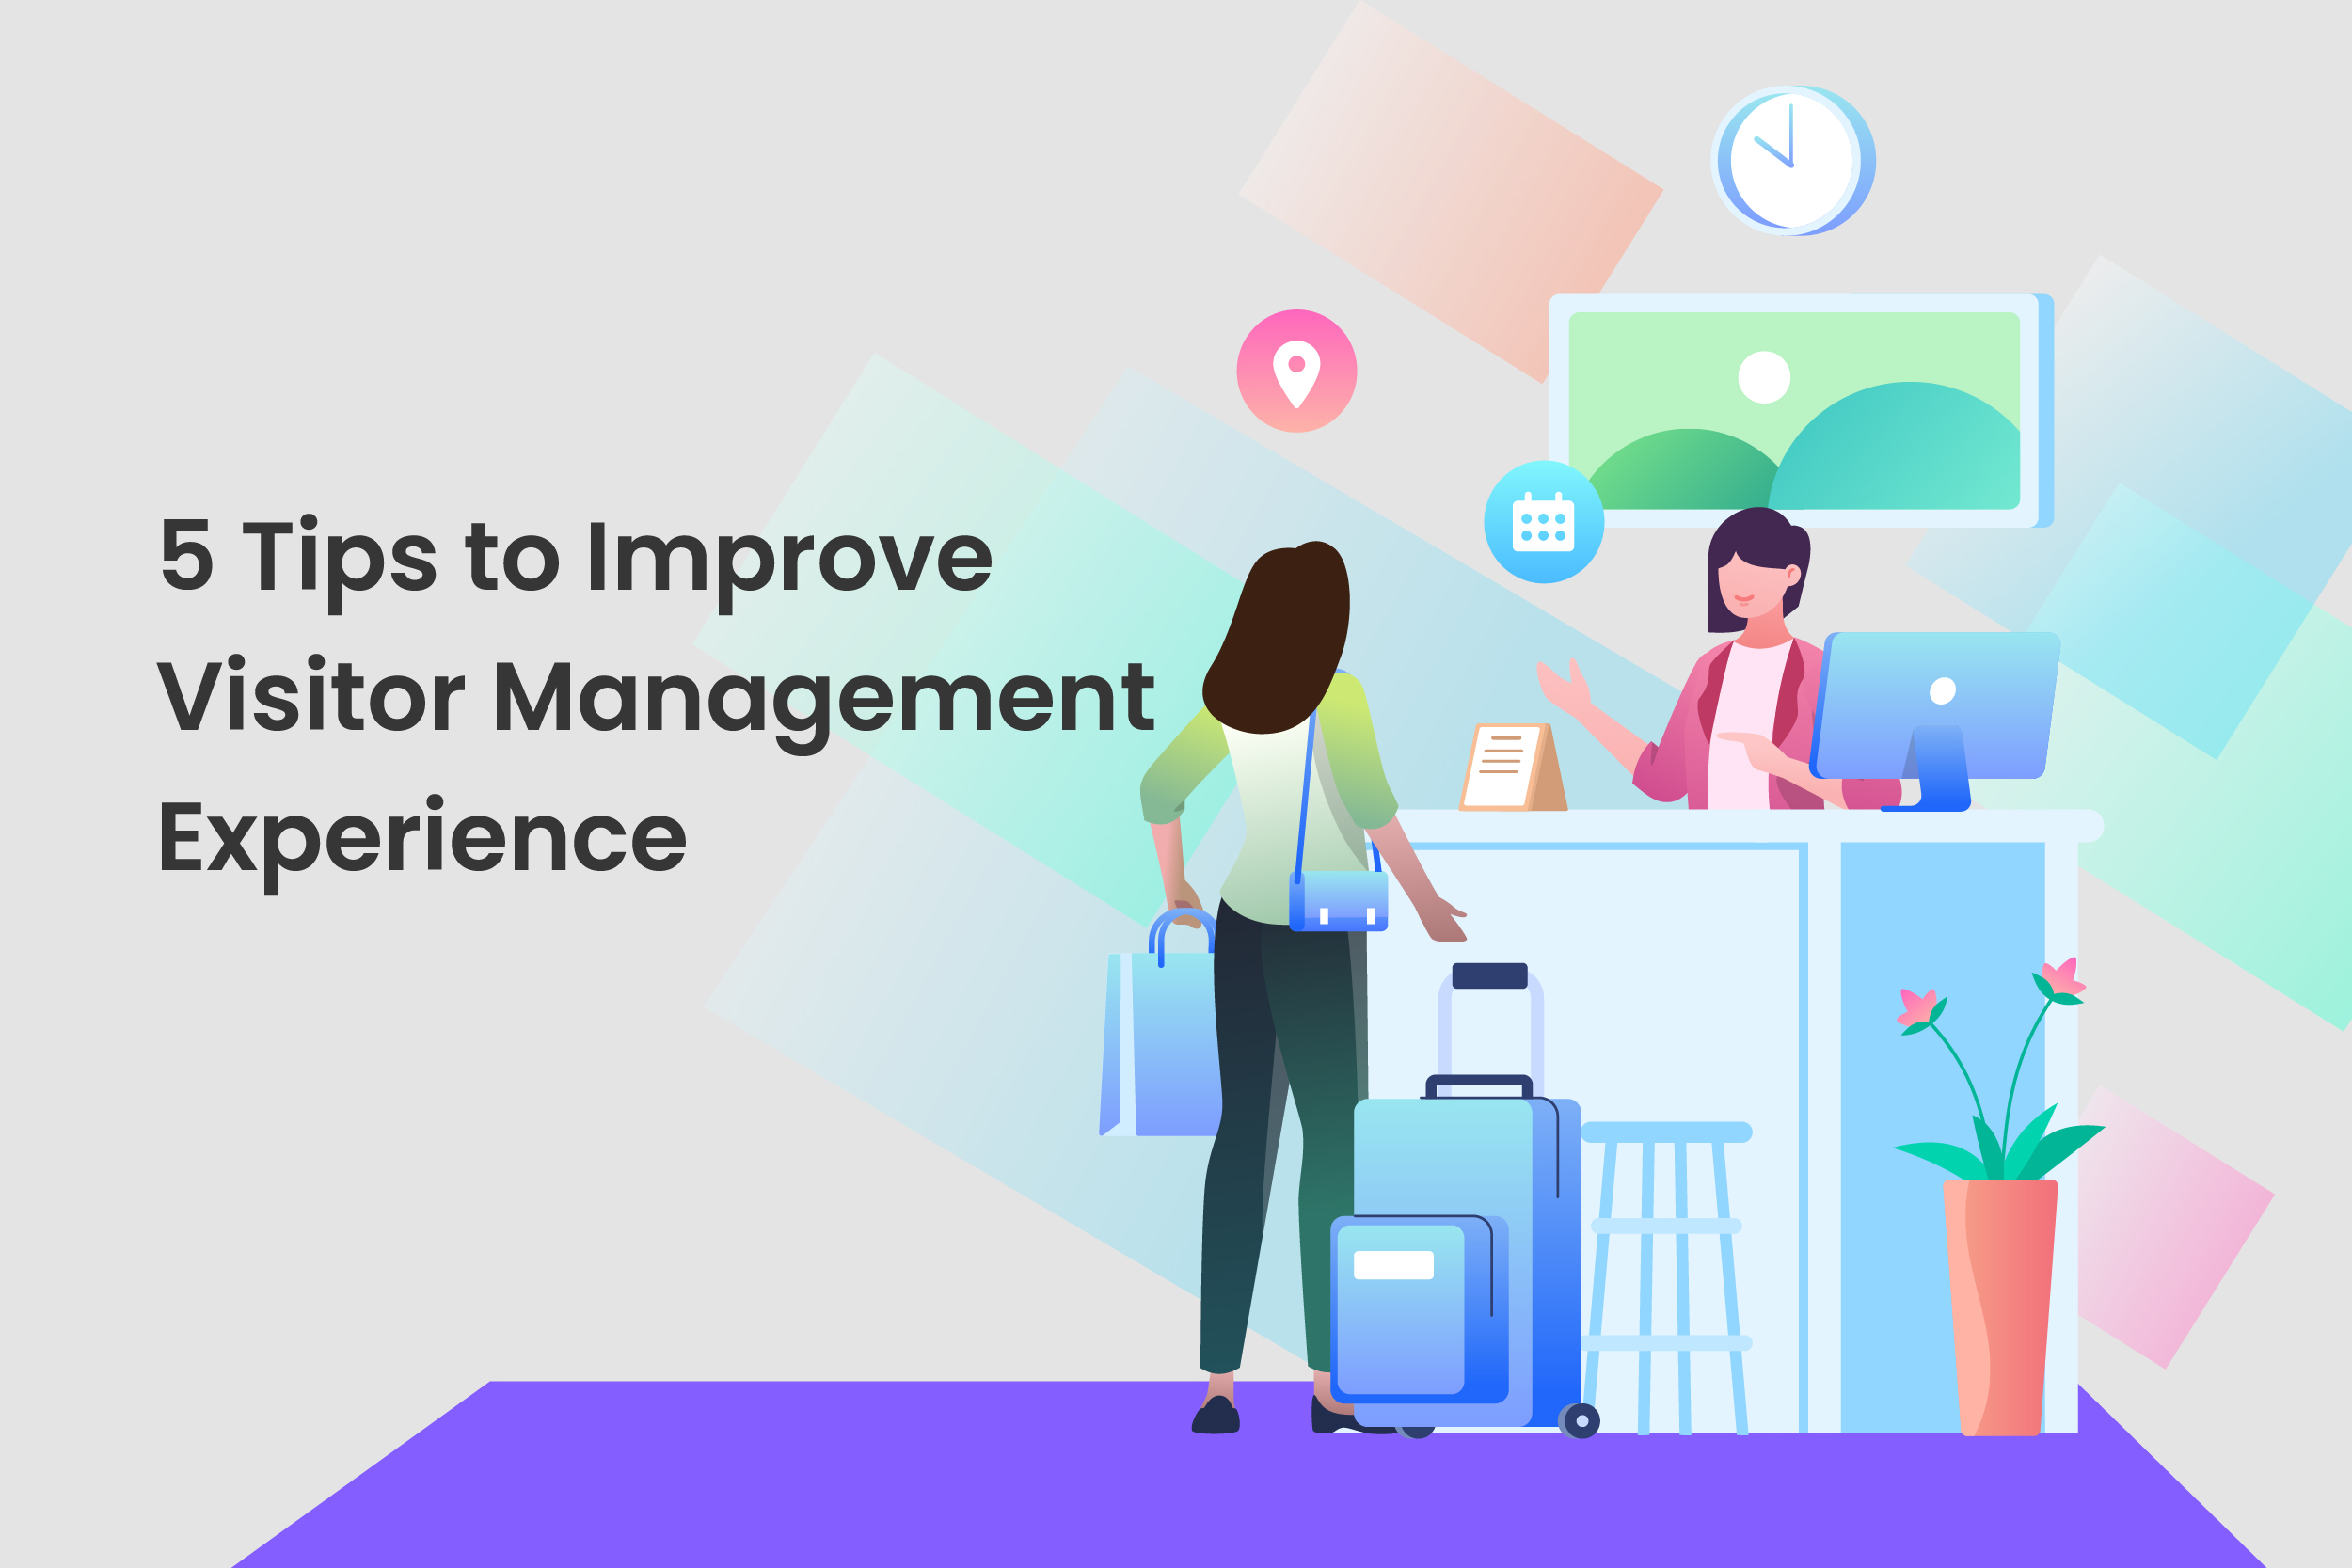 5 Tips to Improve Visitor Management Experience